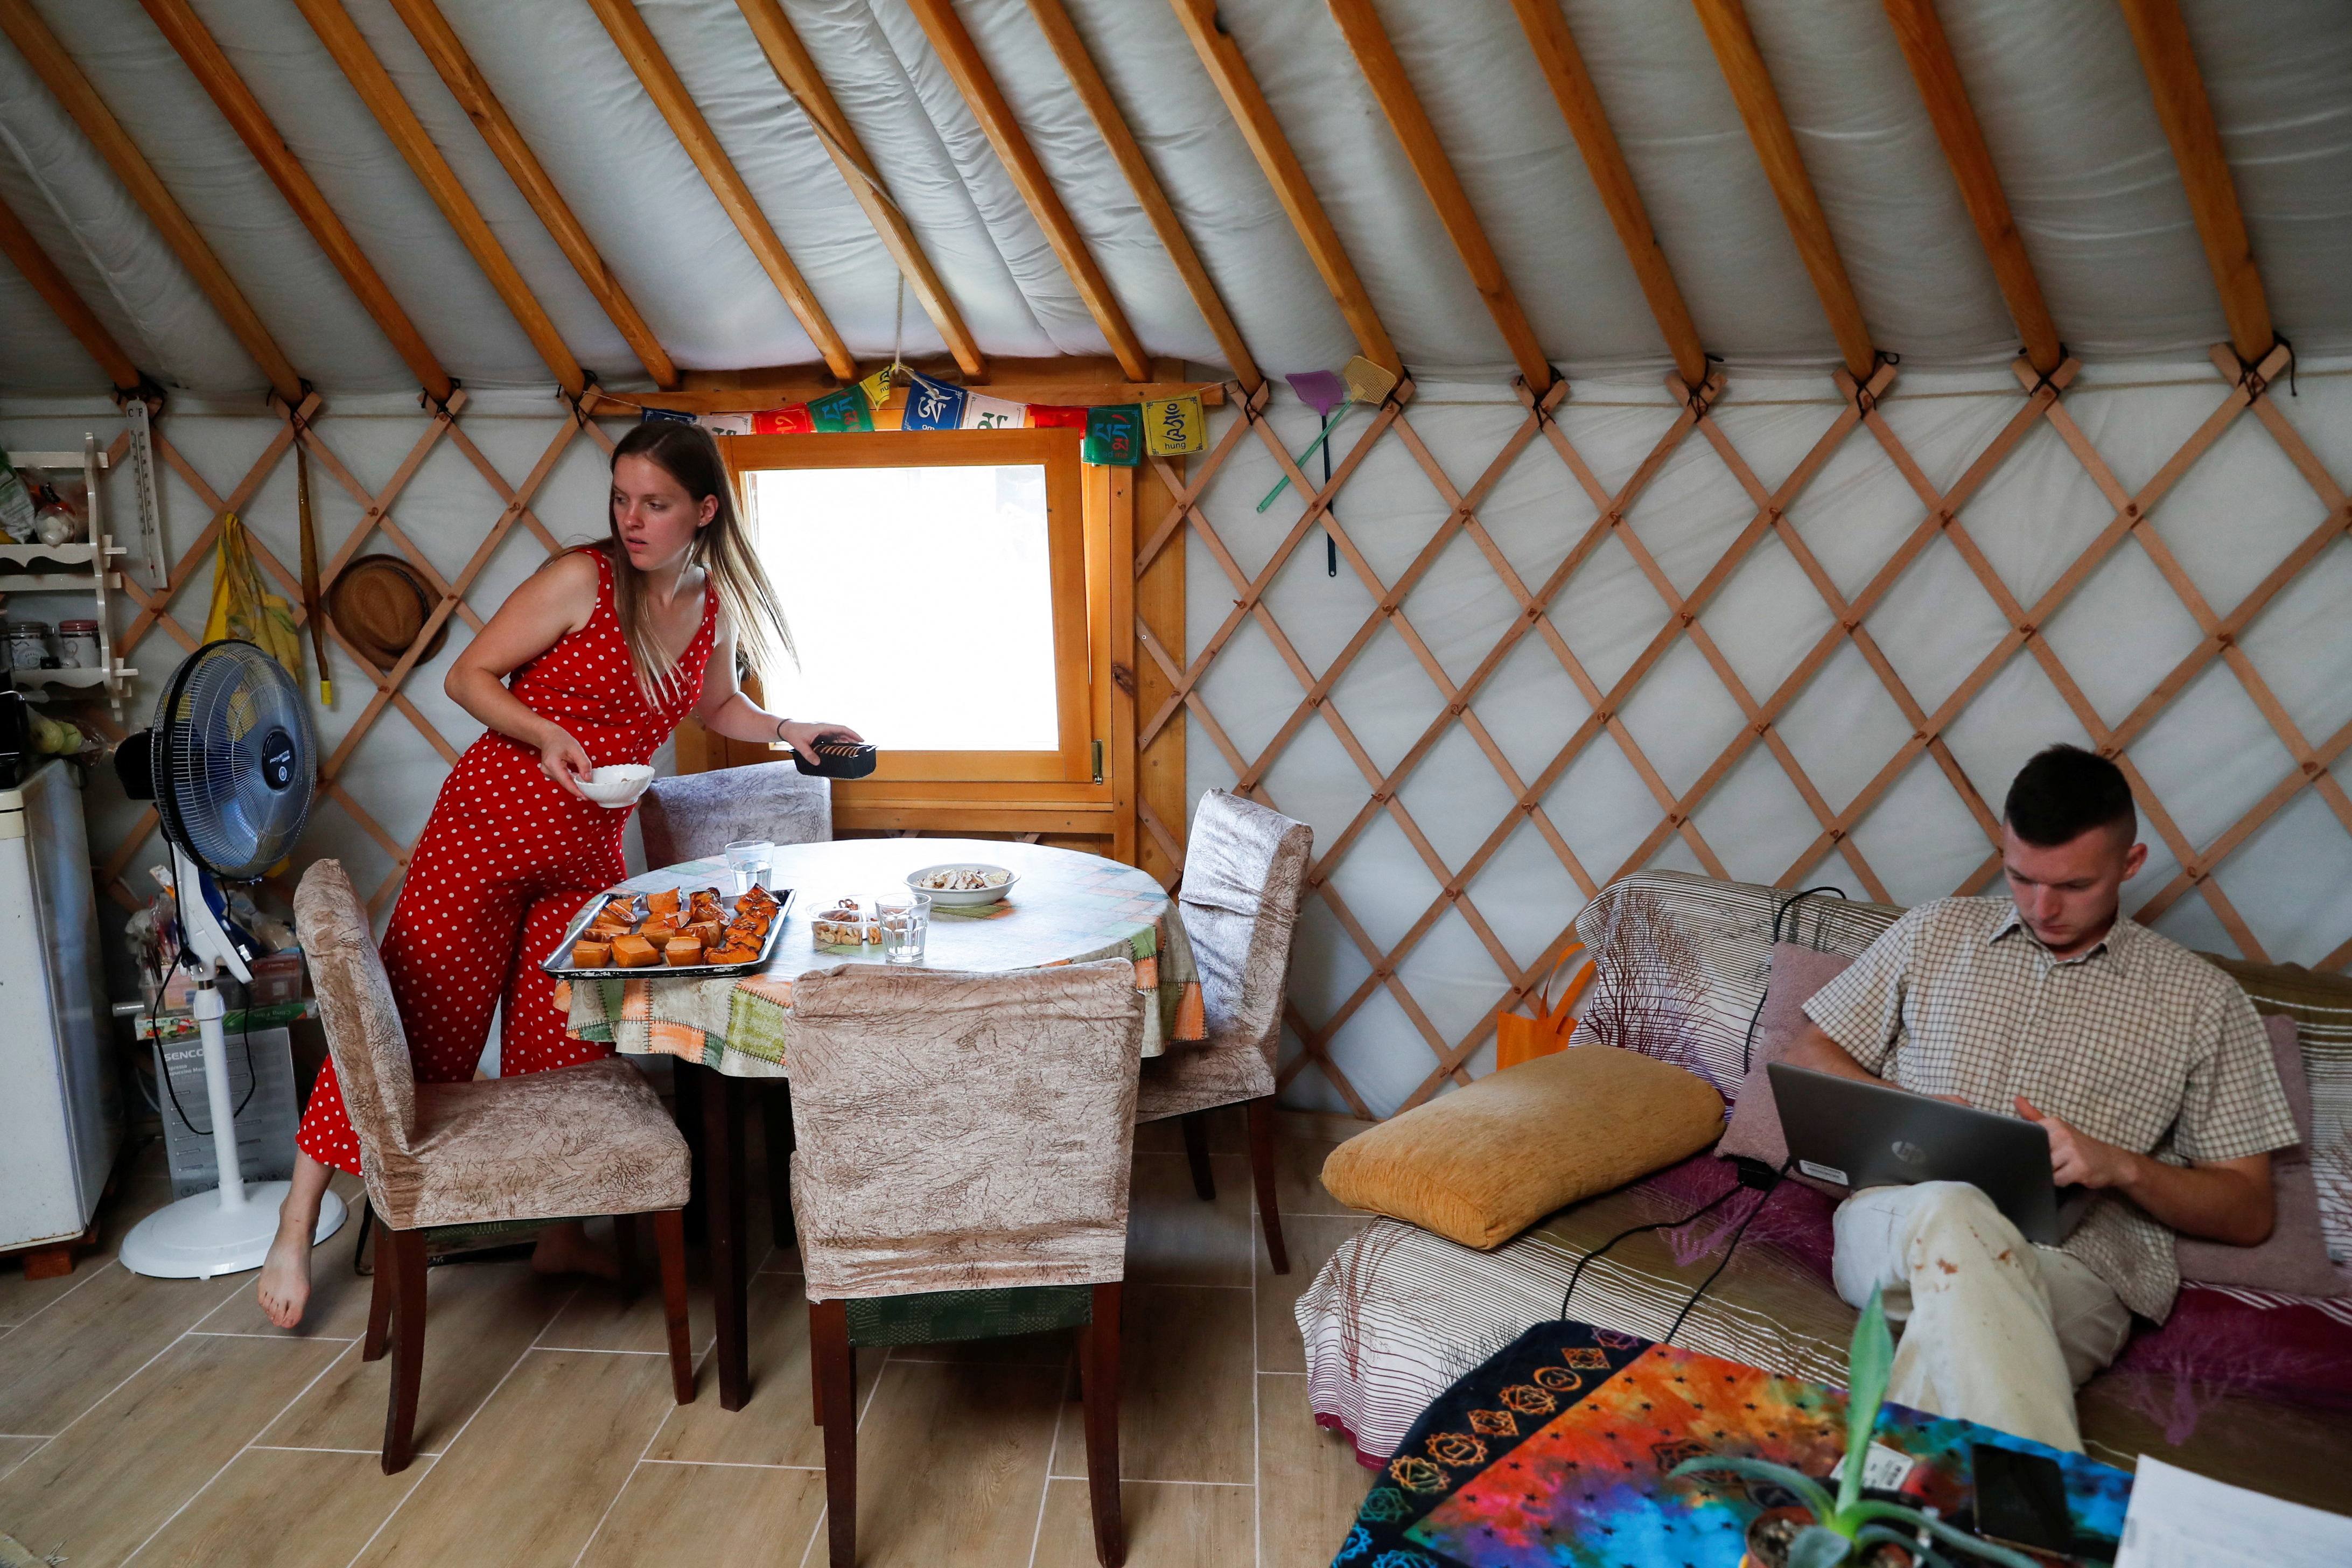 Petra Pogany-Bago prepares lunch as her husband Mihaly works in their yurt tent near Kecskemet